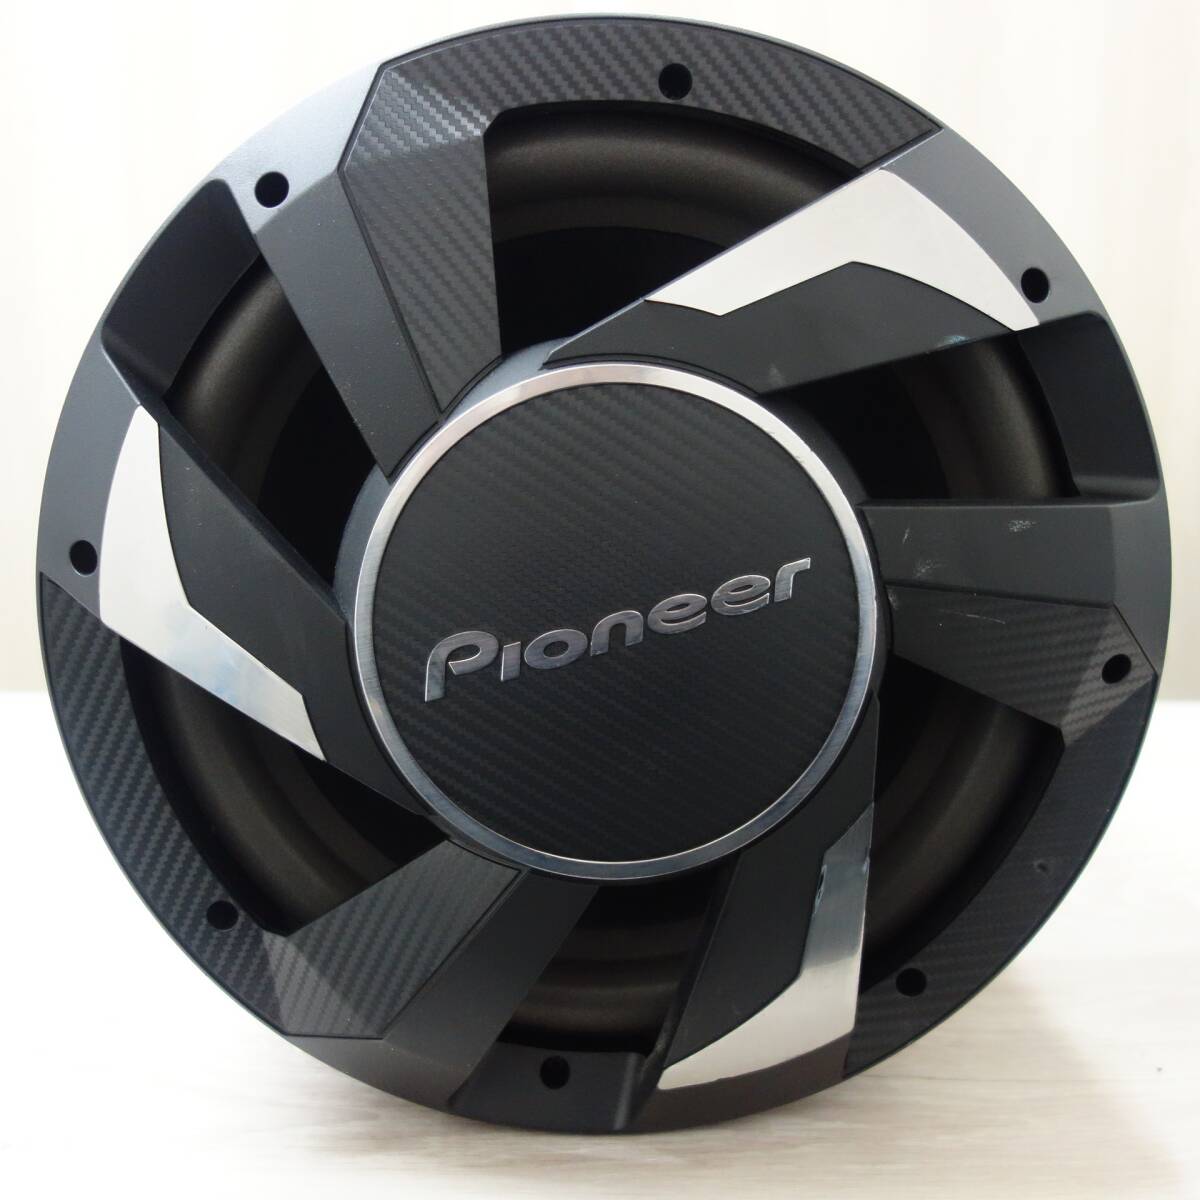 [ free shipping ] * Pioneer powered subwoofer TS-WX300TA Pioneer speaker Car Audio *